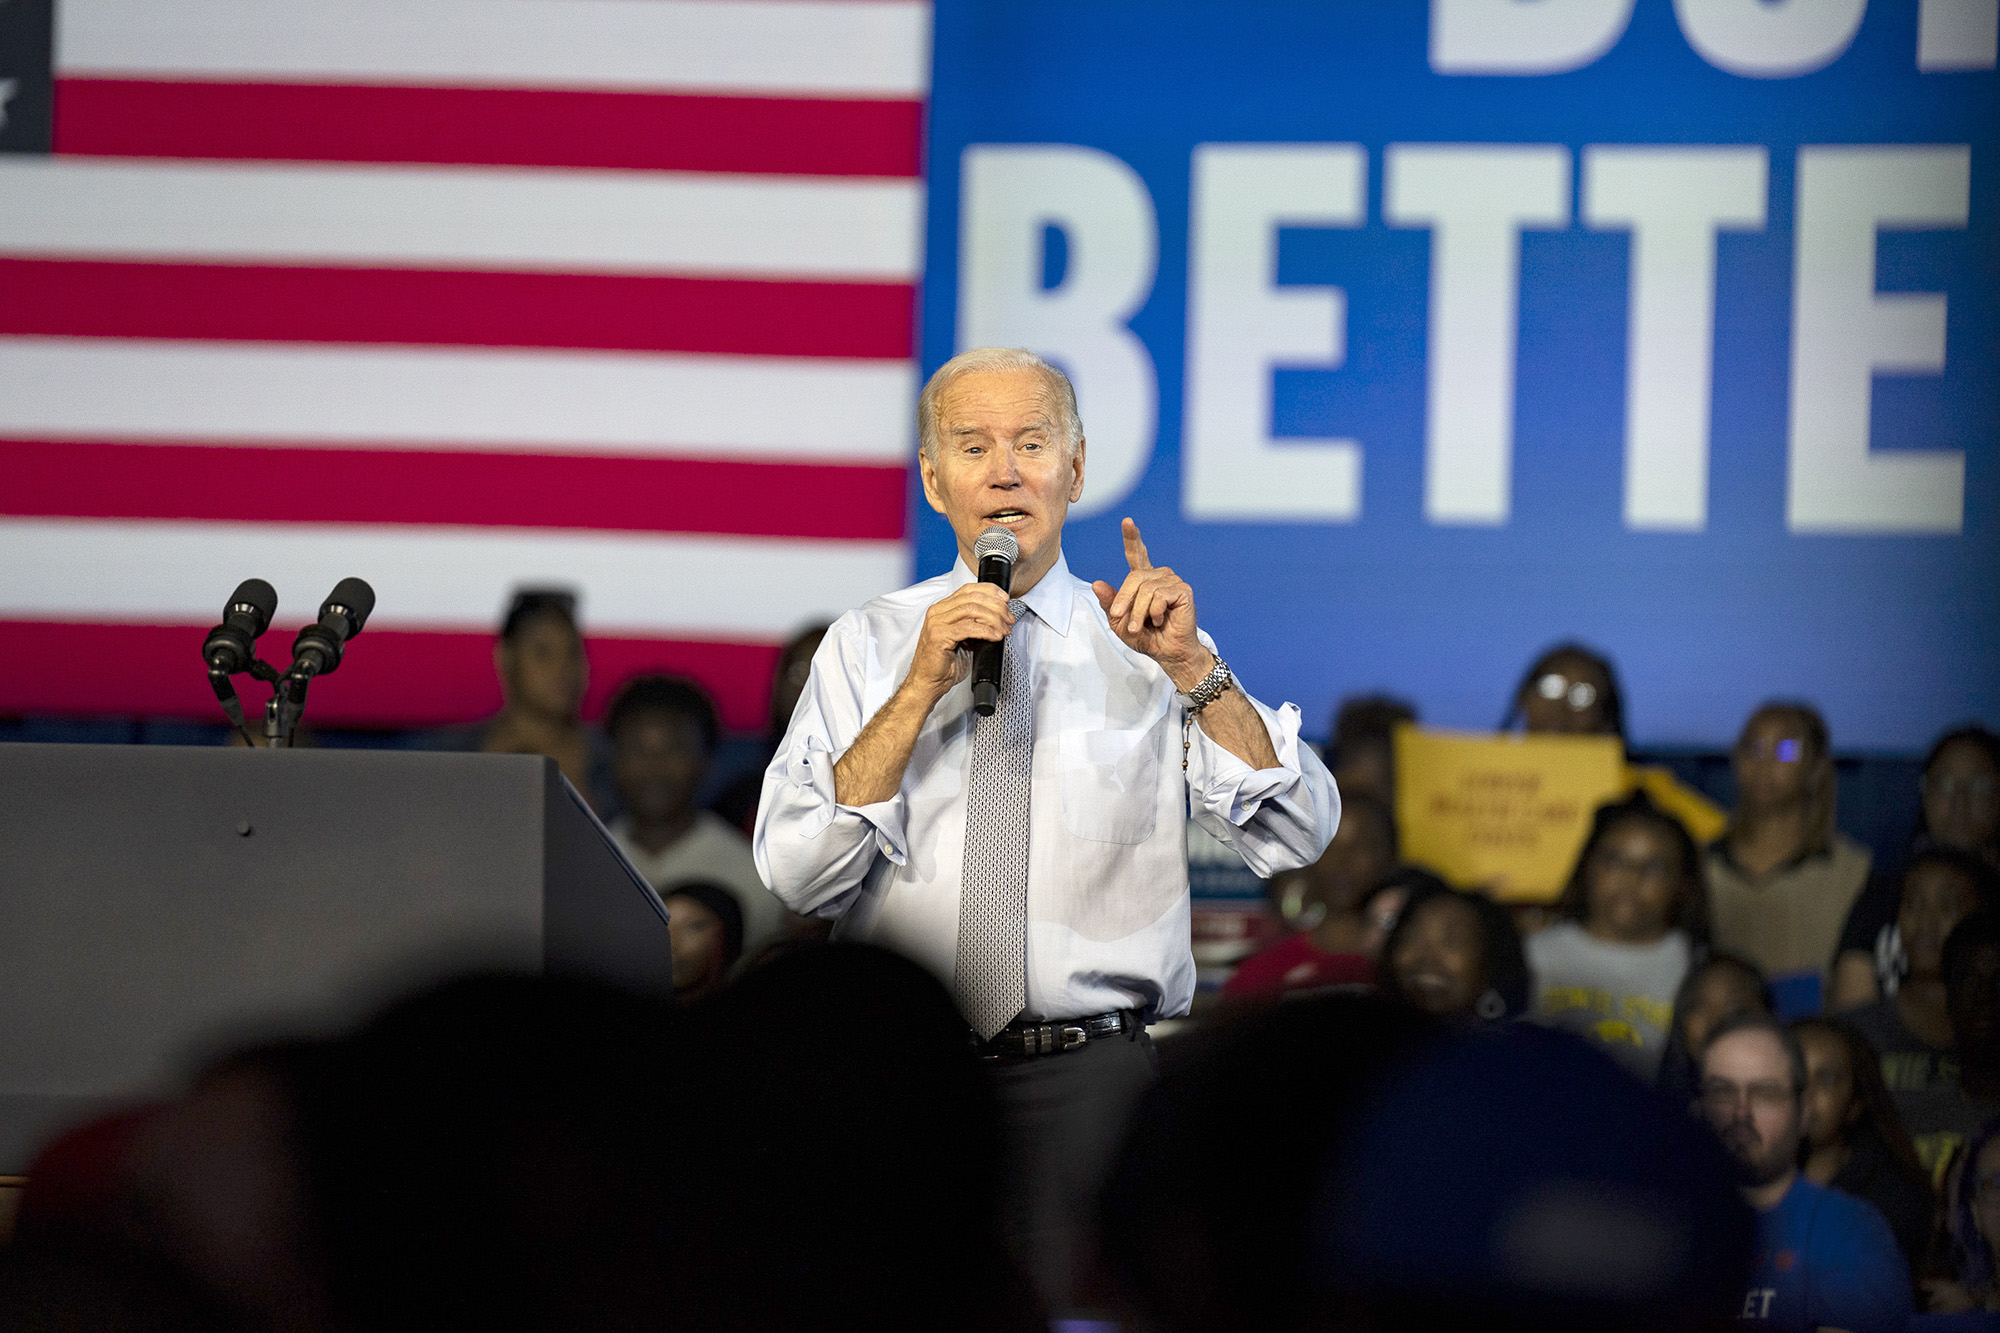 President Joe Biden speaks at a Maryland Democratic Party Get Out the Vote Rally for gubernatorial candidate Wes Moore at Bowie State University in Bowie, Maryland, on November 8.